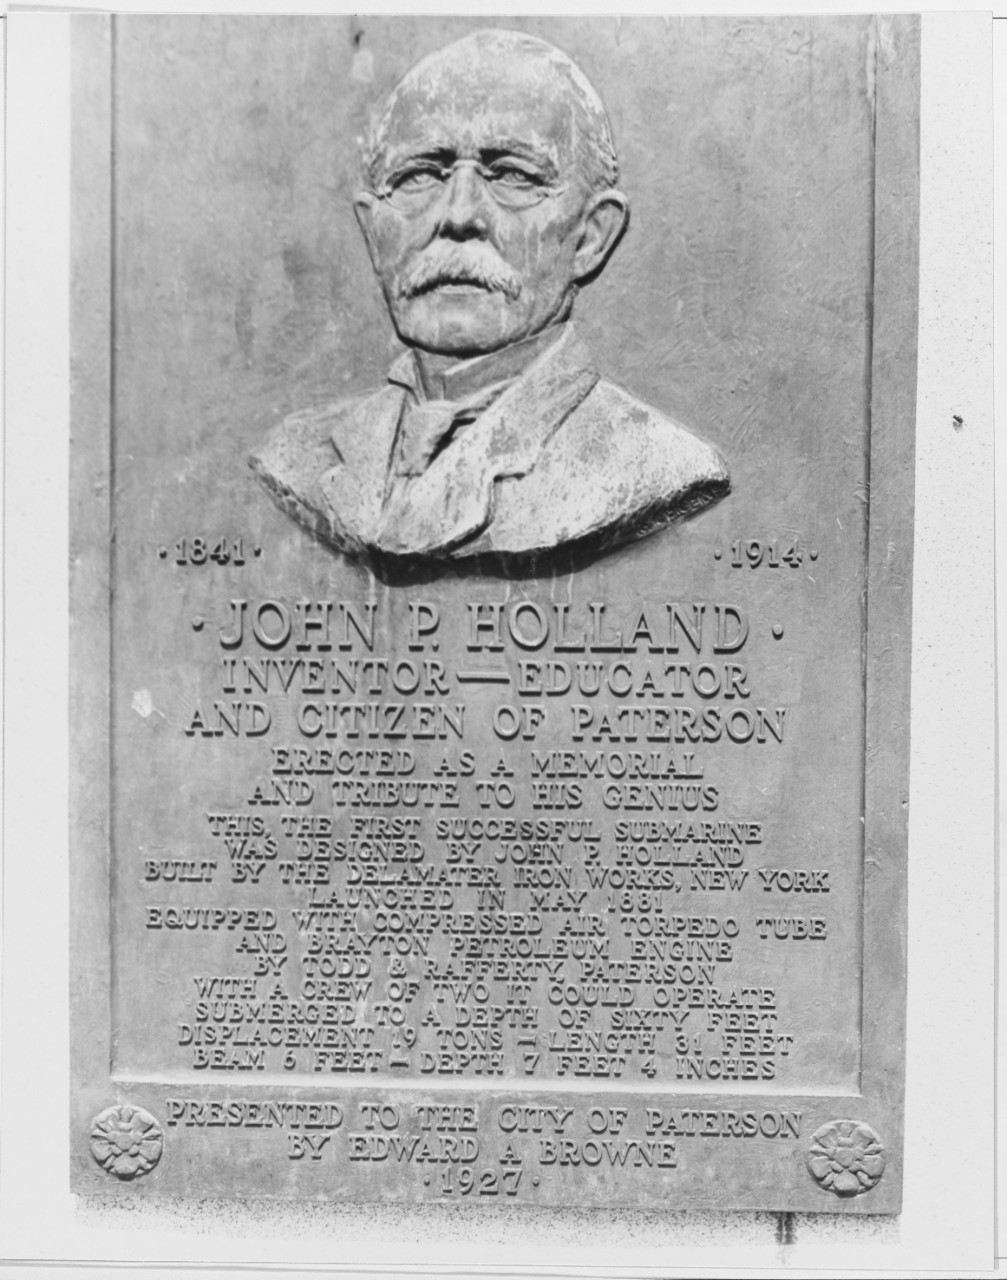 Memorial to John P. Holland in the city of Paterson. 1844-1914